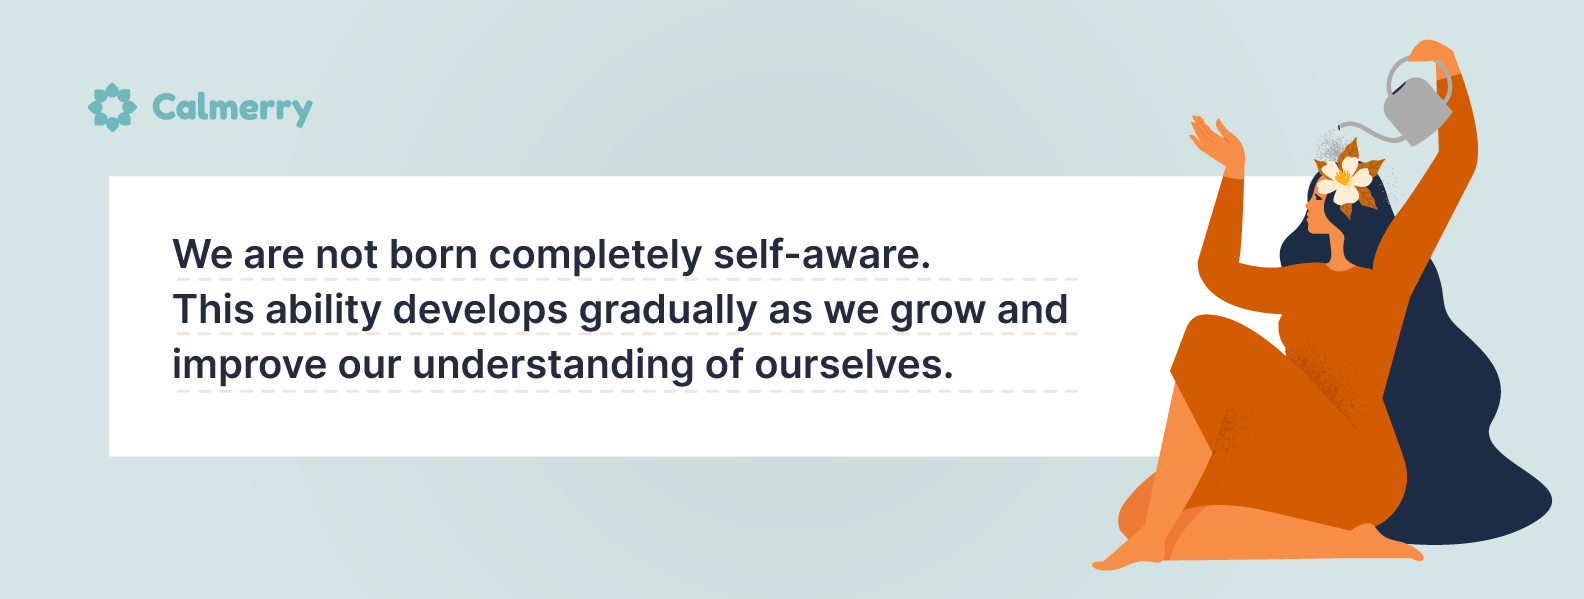 We are not born completely self-aware. This ability develops gradually as we grow and improve our understanding of ourselves.